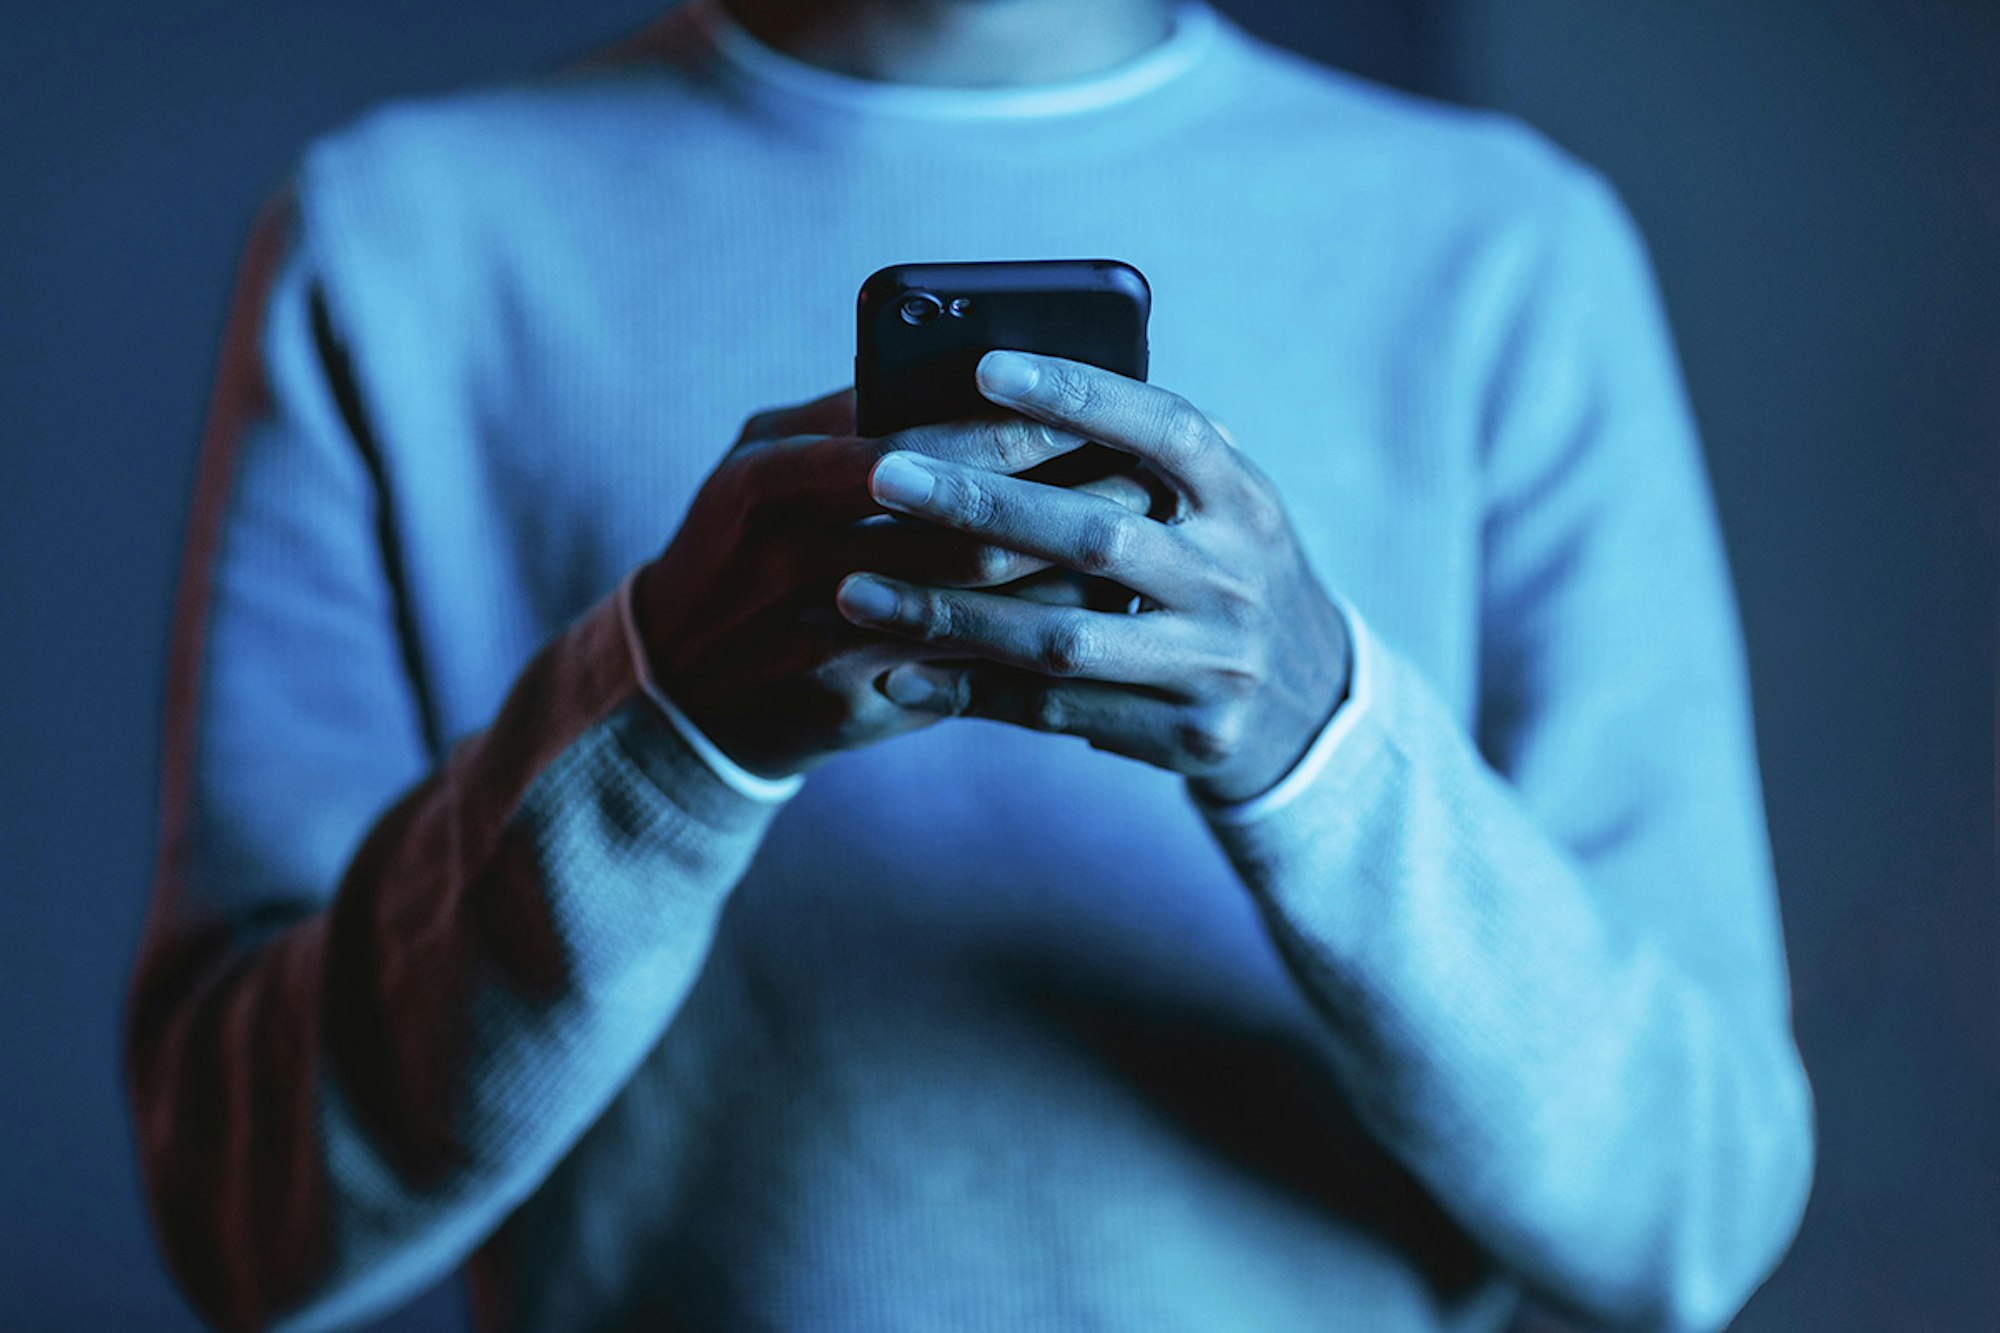 How to block hackers from your phone